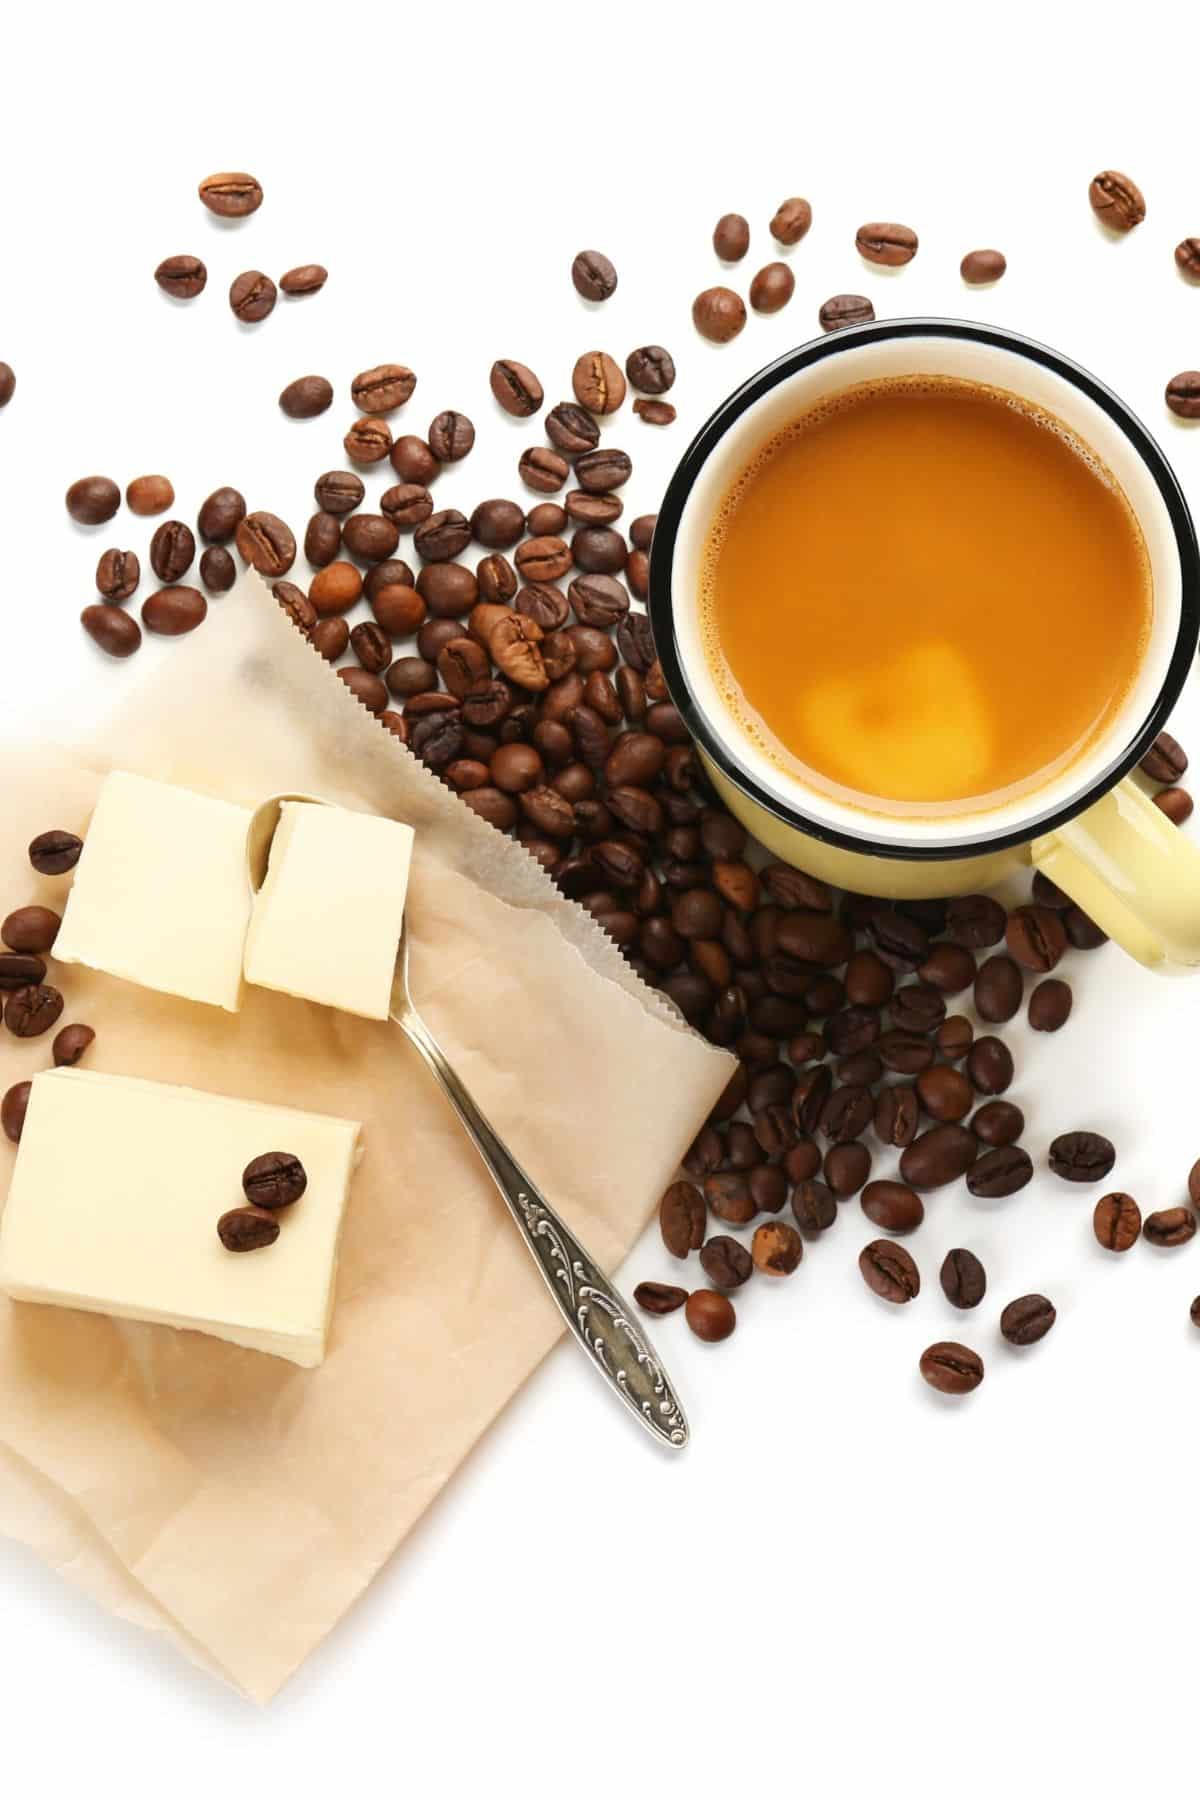 ingredients for butter coffee on a tabletop.